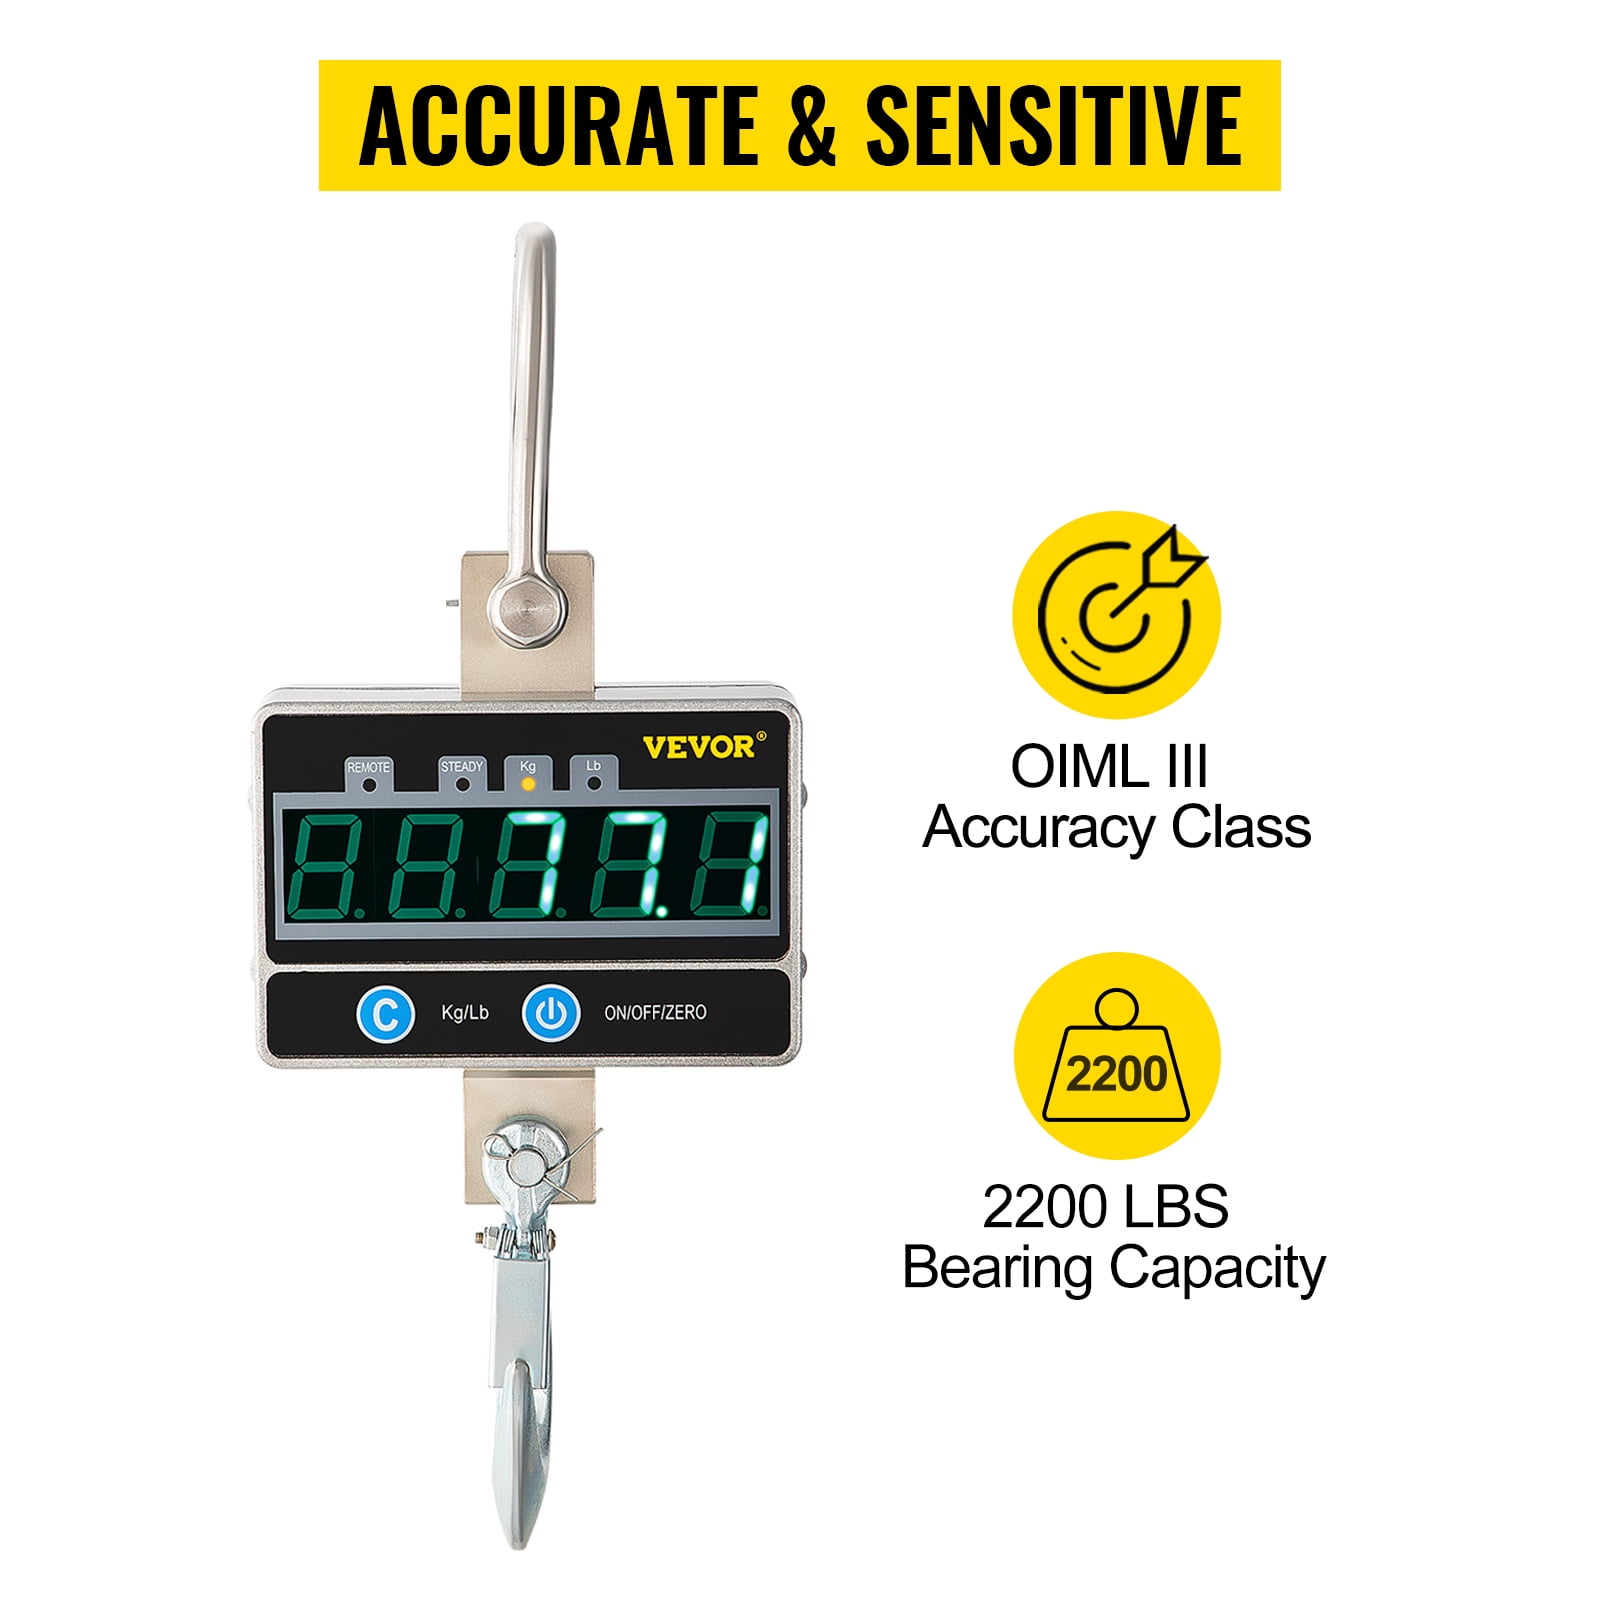 VEVOR Digital Crane Scale 1000KG 2000LBS Orange Digital Industrial Heavy  Duty Crane Scale with Accurate Reloading Spring Sensor for Hunting, Farm or  Construction 